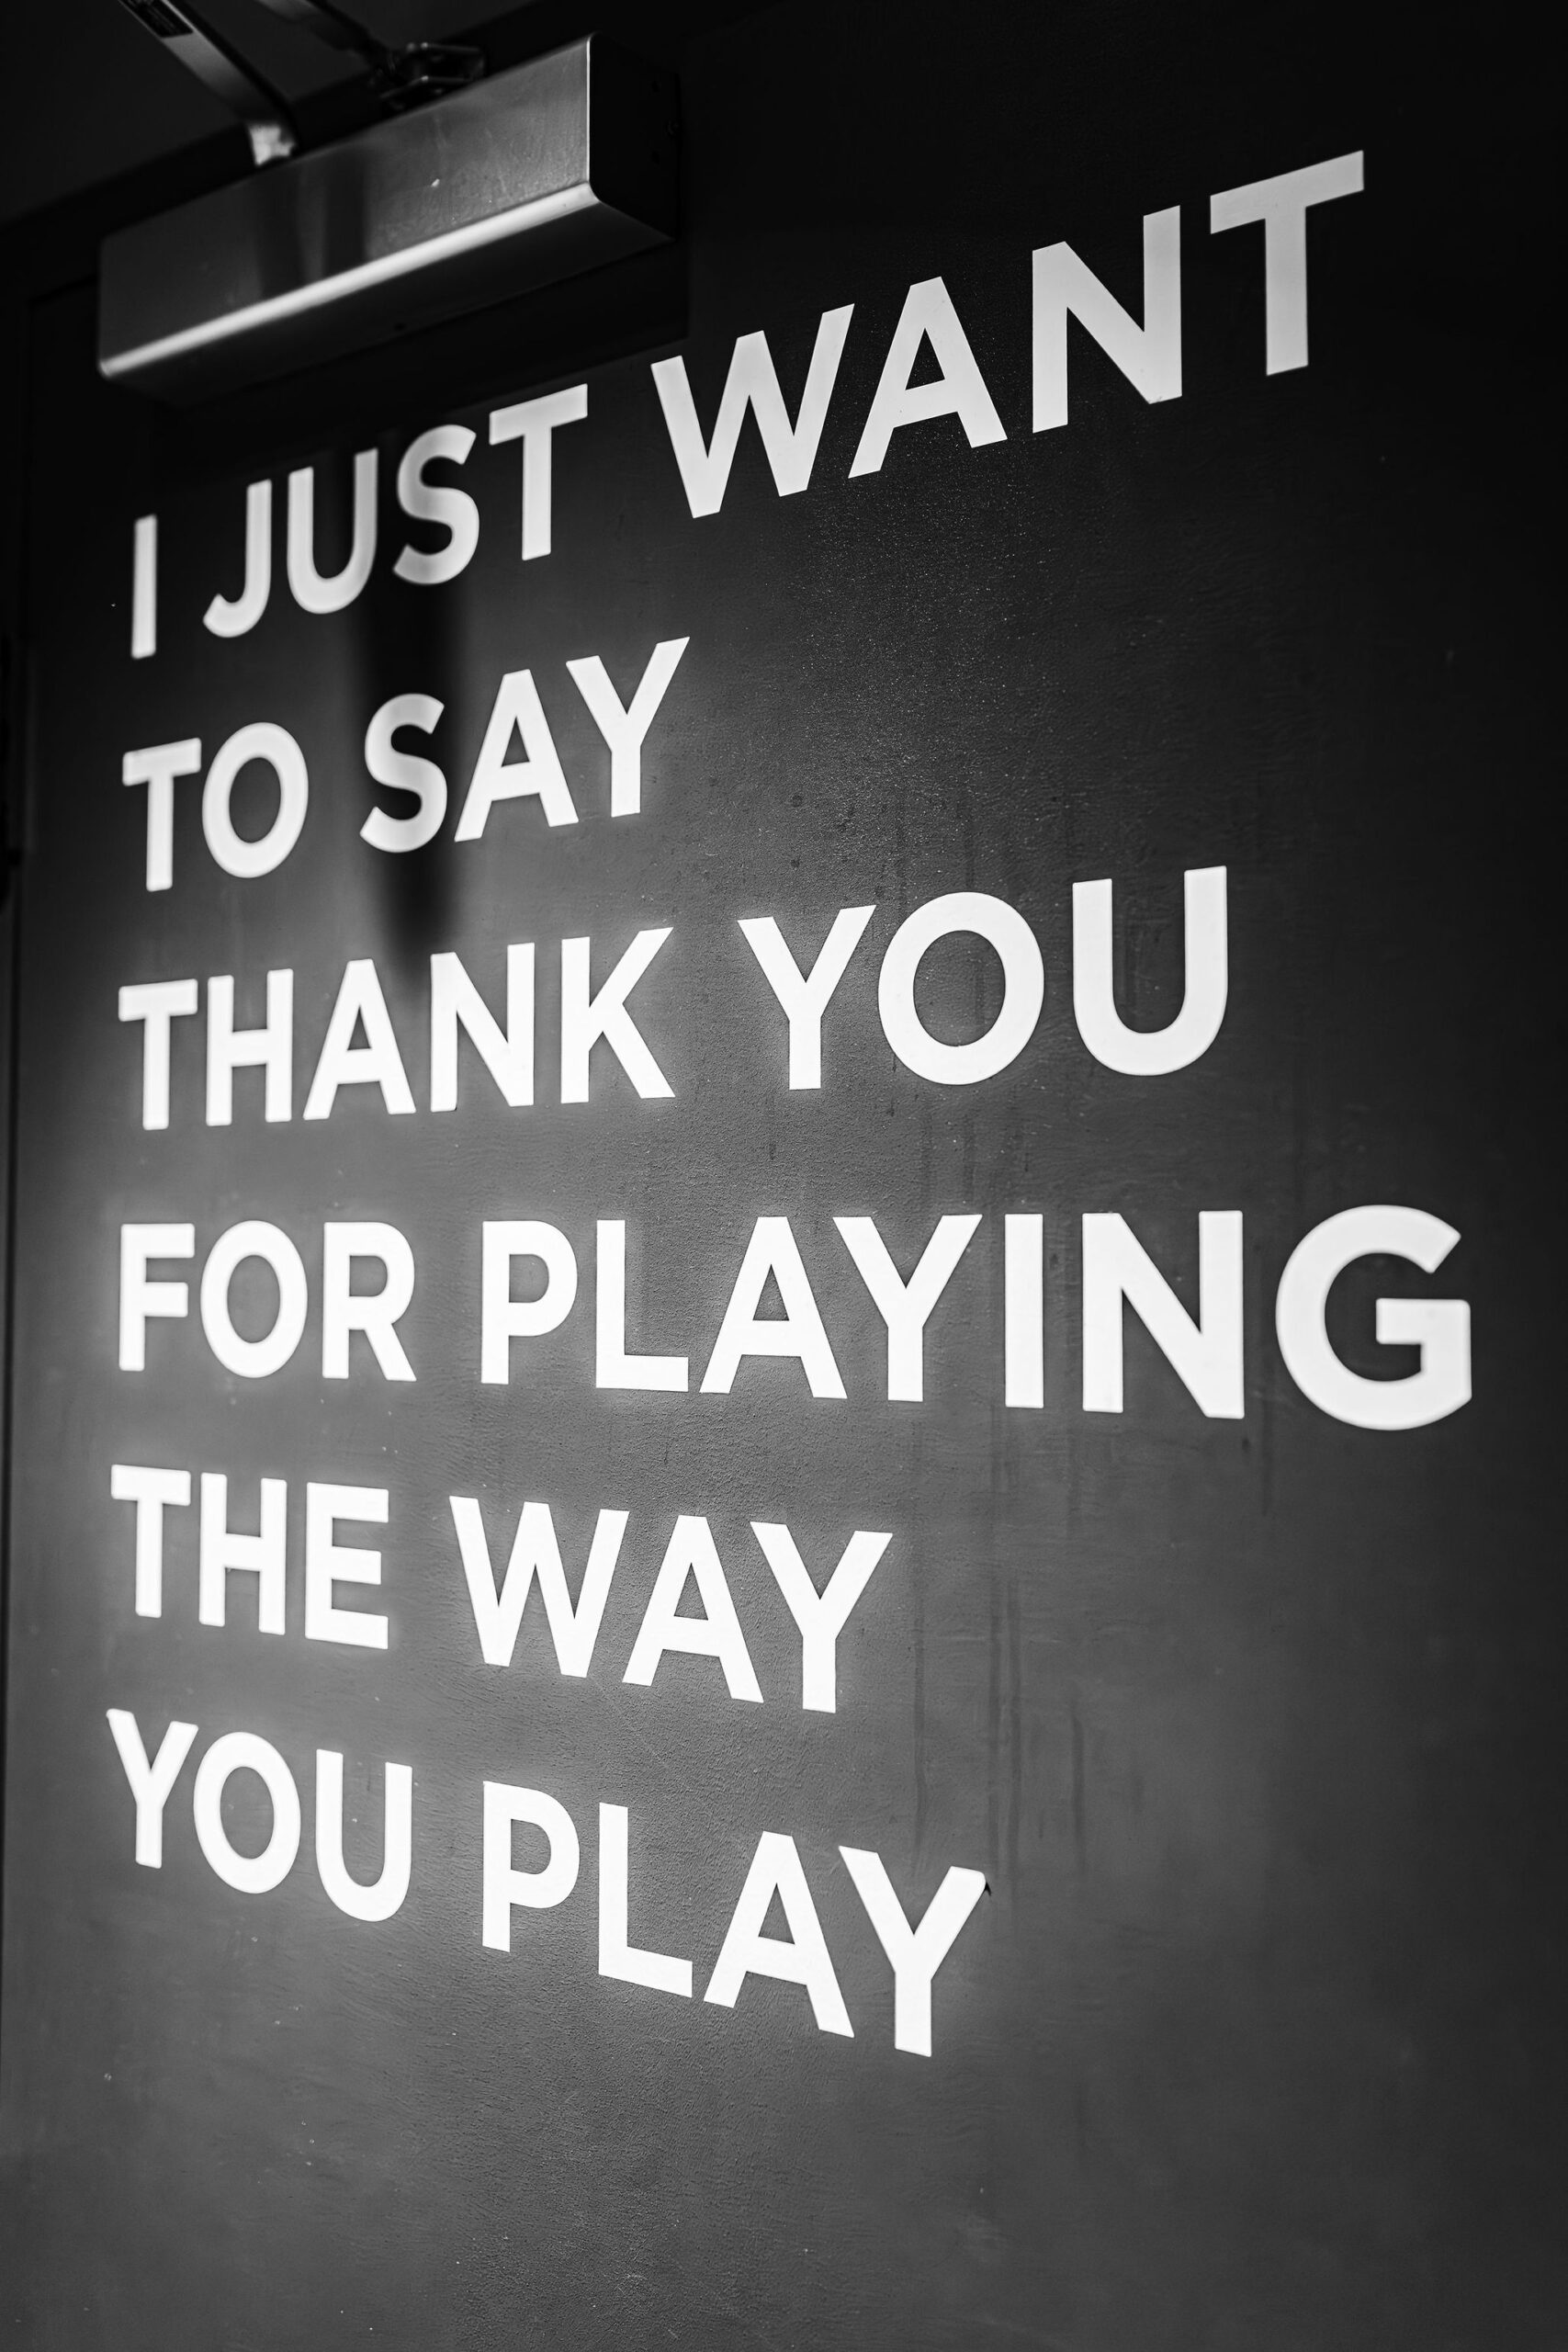 A black and white image of a sign reading "I just want to say thank you for playing the way you play"